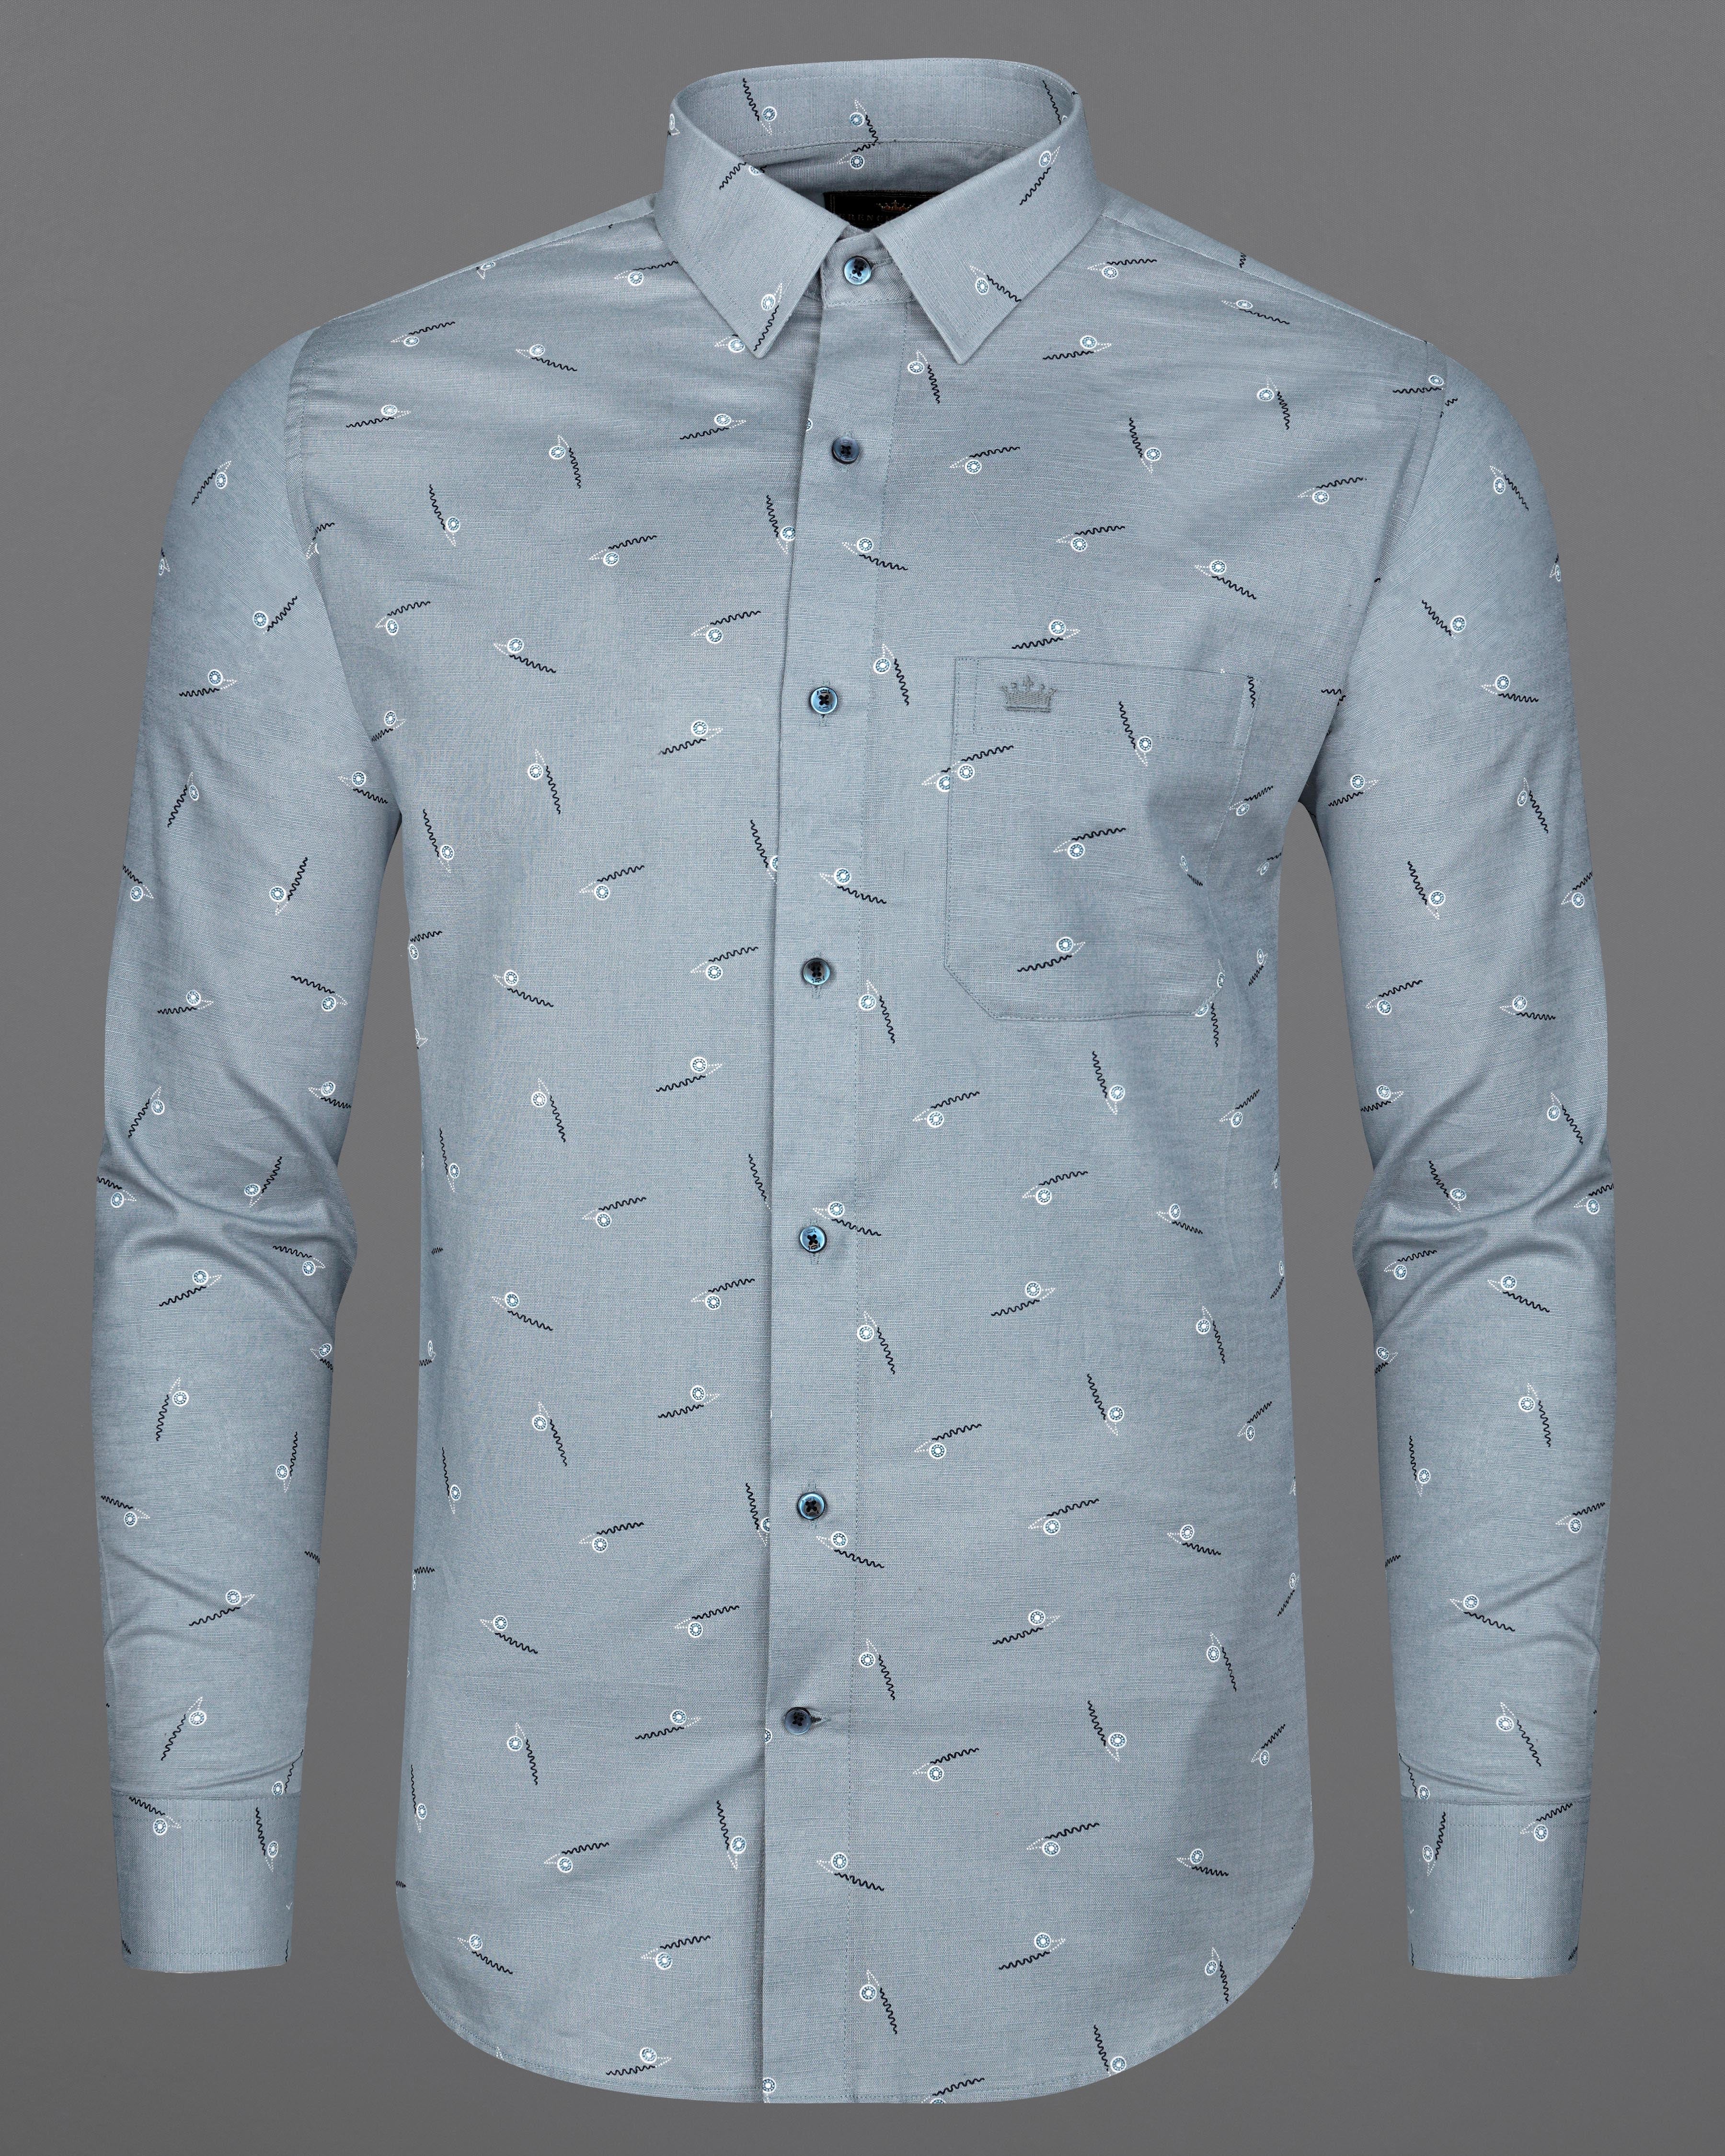 Pewter Gray Printed Luxurious Linen Shirt 8265-BLE-38, 8265-BLE-H-38, 8265-BLE-39, 8265-BLE-H-39, 8265-BLE-40, 8265-BLE-H-40, 8265-BLE-42, 8265-BLE-H-42, 8265-BLE-44, 8265-BLE-H-44, 8265-BLE-46, 8265-BLE-H-46, 8265-BLE-48, 8265-BLE-H-48, 8265-BLE-50, 8265-BLE-H-50, 8265-BLE-52, 8265-BLE-H-52